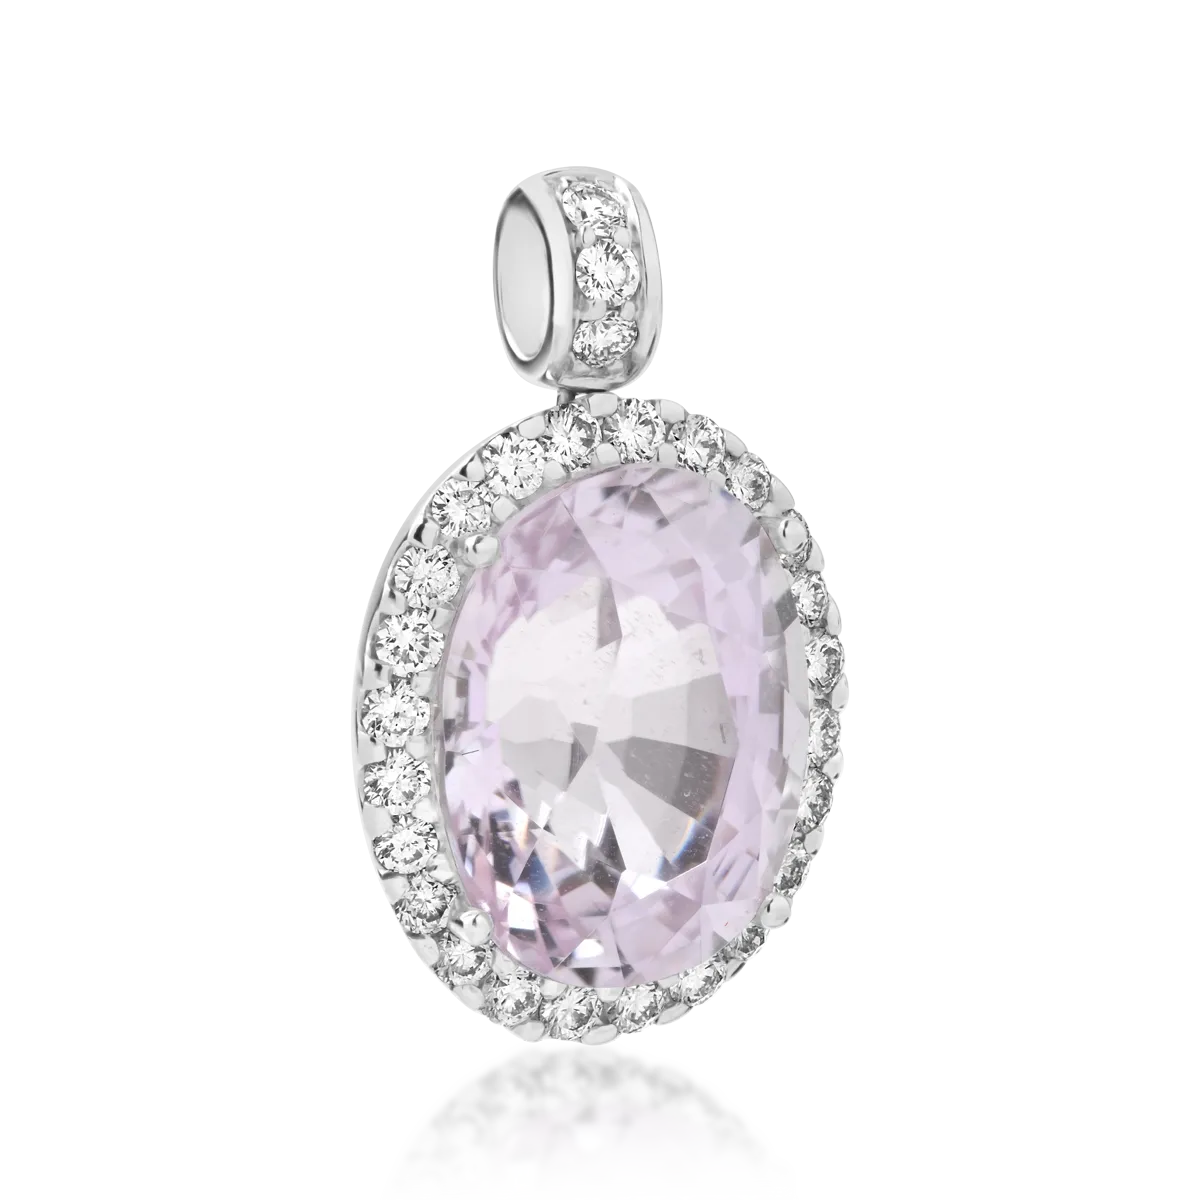 18K white gold pendant with kunzite of 6.21ct and diamonds of 0.44ct